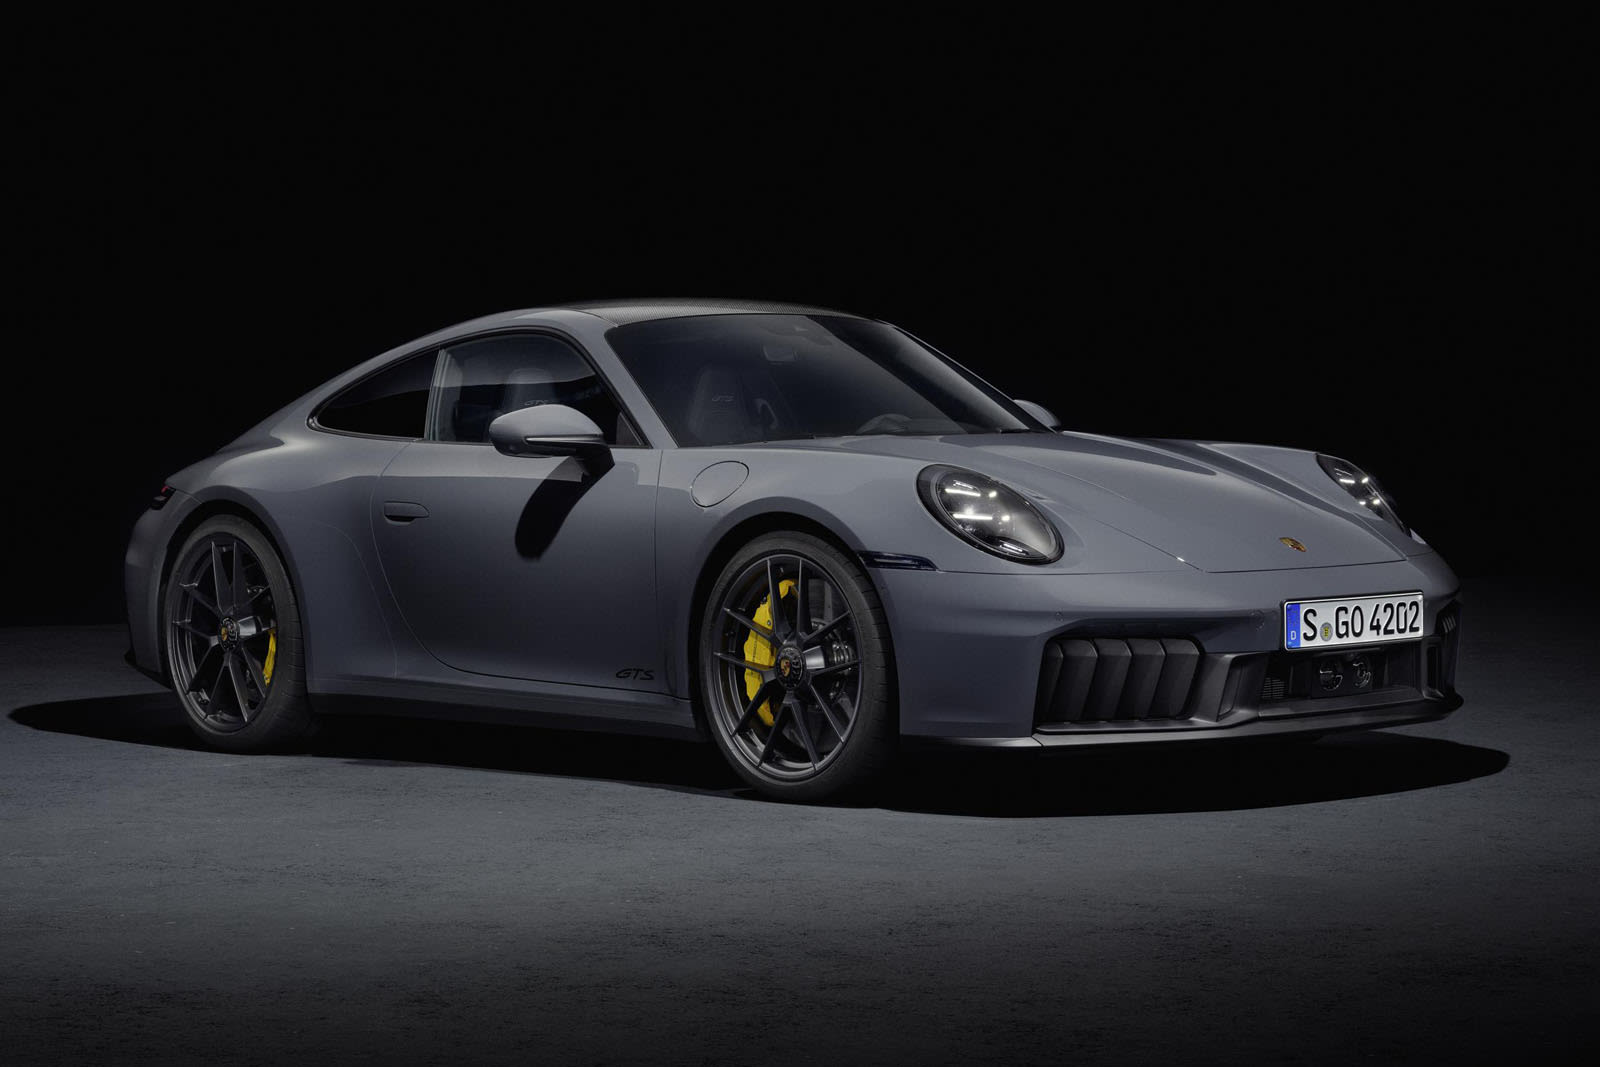 Porsche 911 GTS goes hybrid for 534bhp and blistering track pace